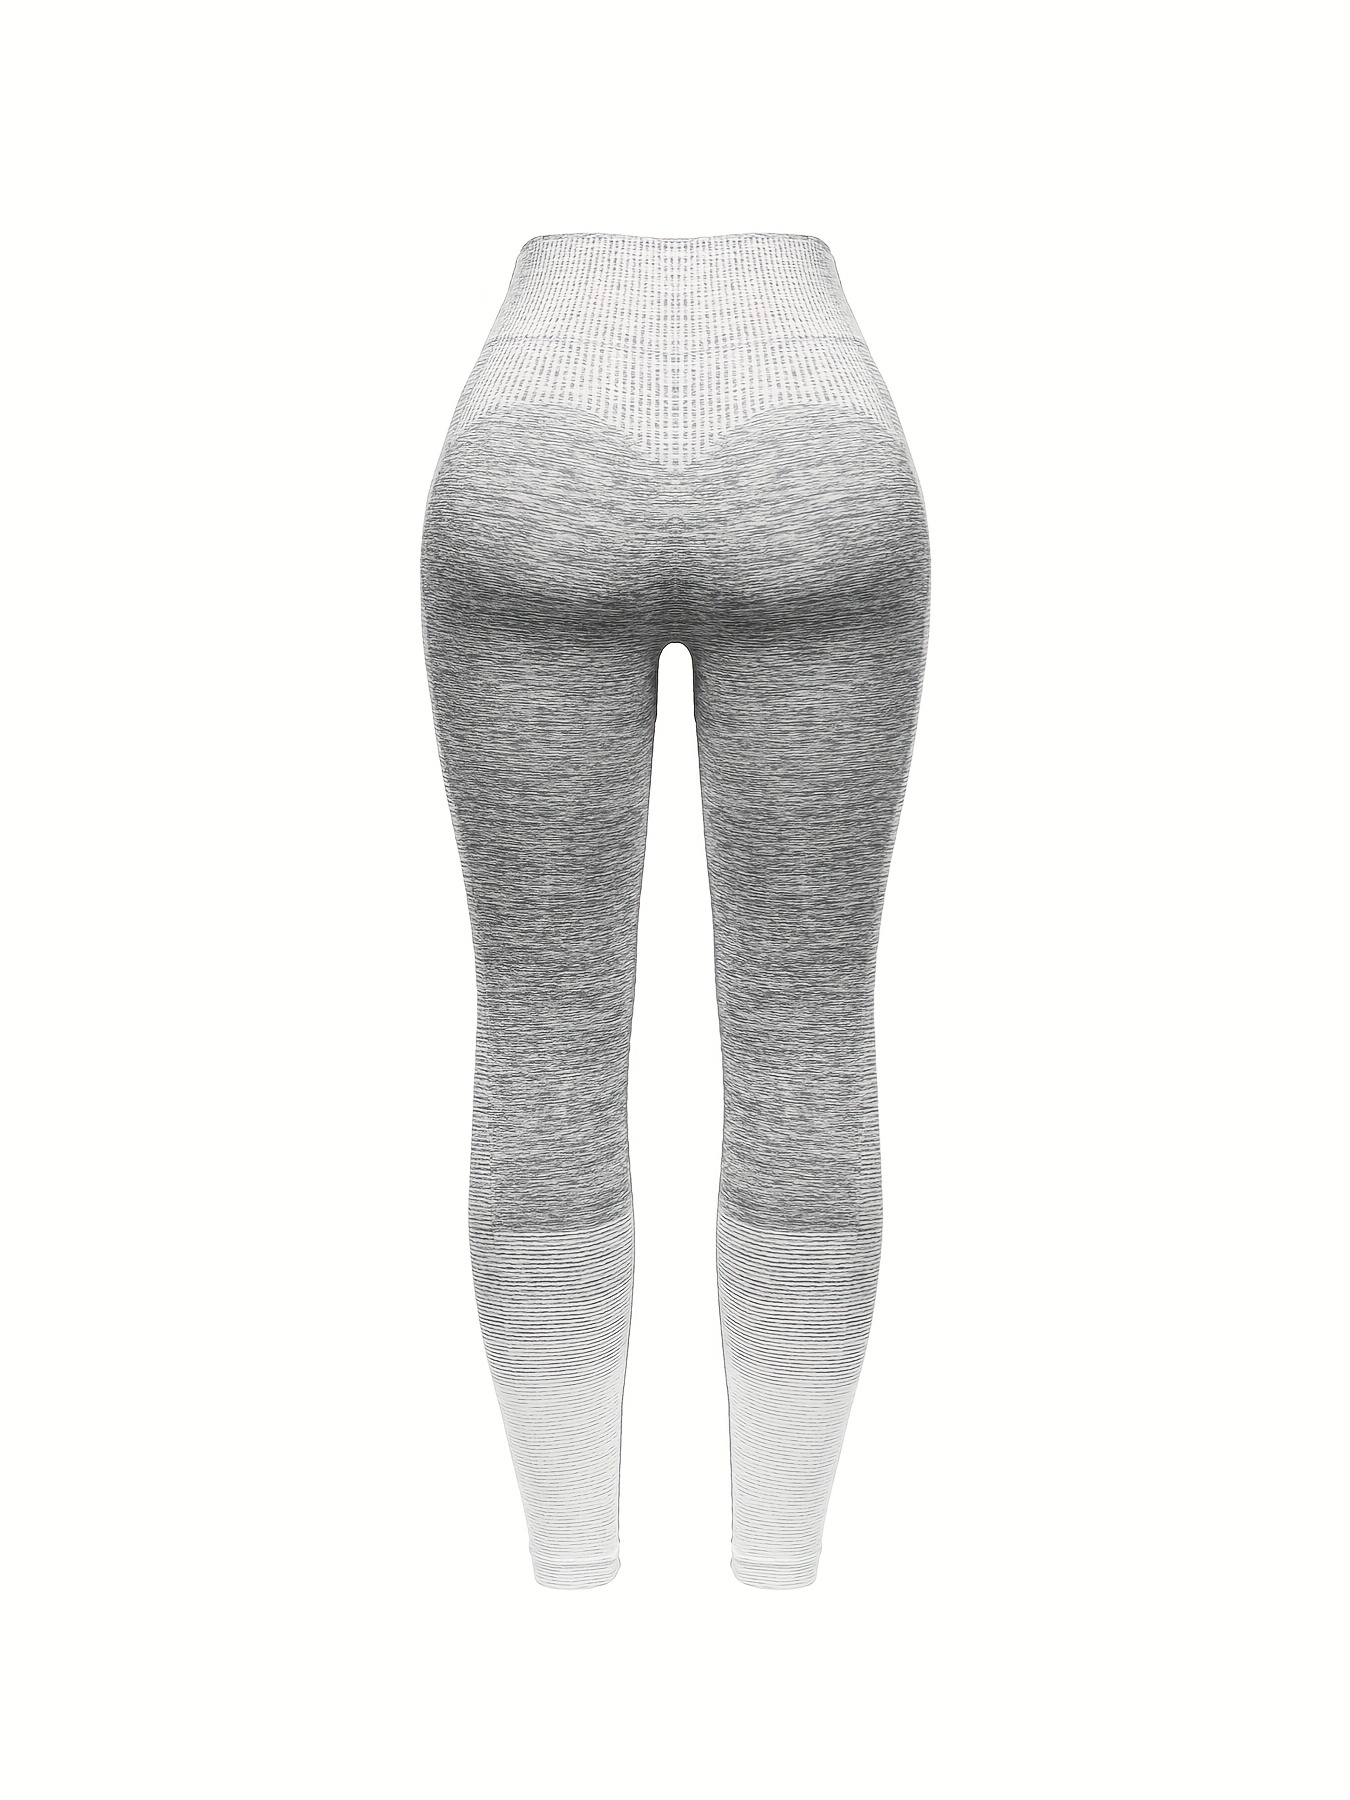 Gradient knit leggings for woman / adult knit pants / ombre leggings / slim  fit knitted pants / gray charcoal white / warm woman leggings